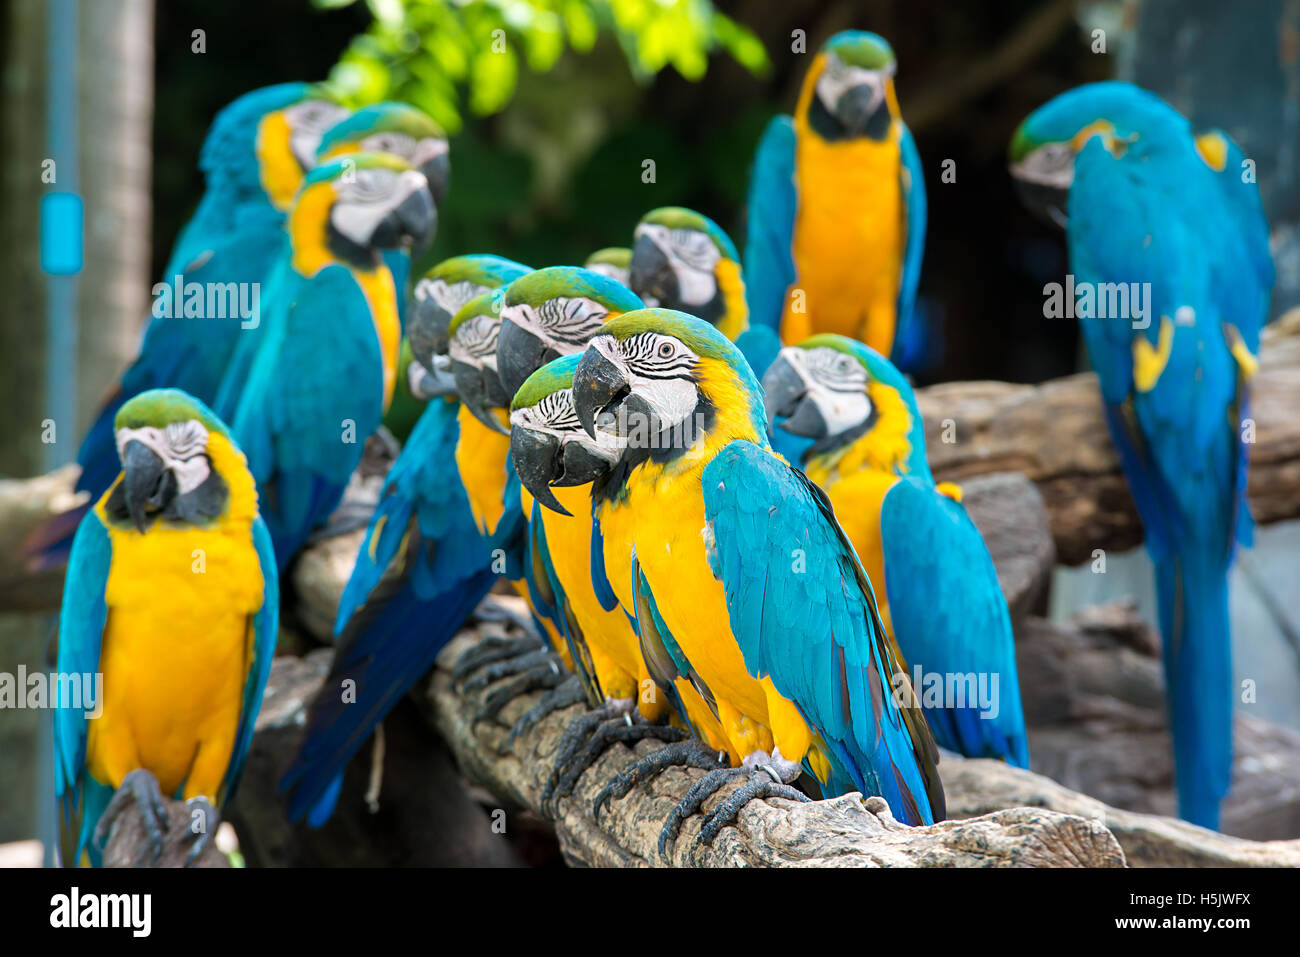 Blue and yellow macaw birds sitting on wood branch. Colorful macaw birds in forest. Stock Photo